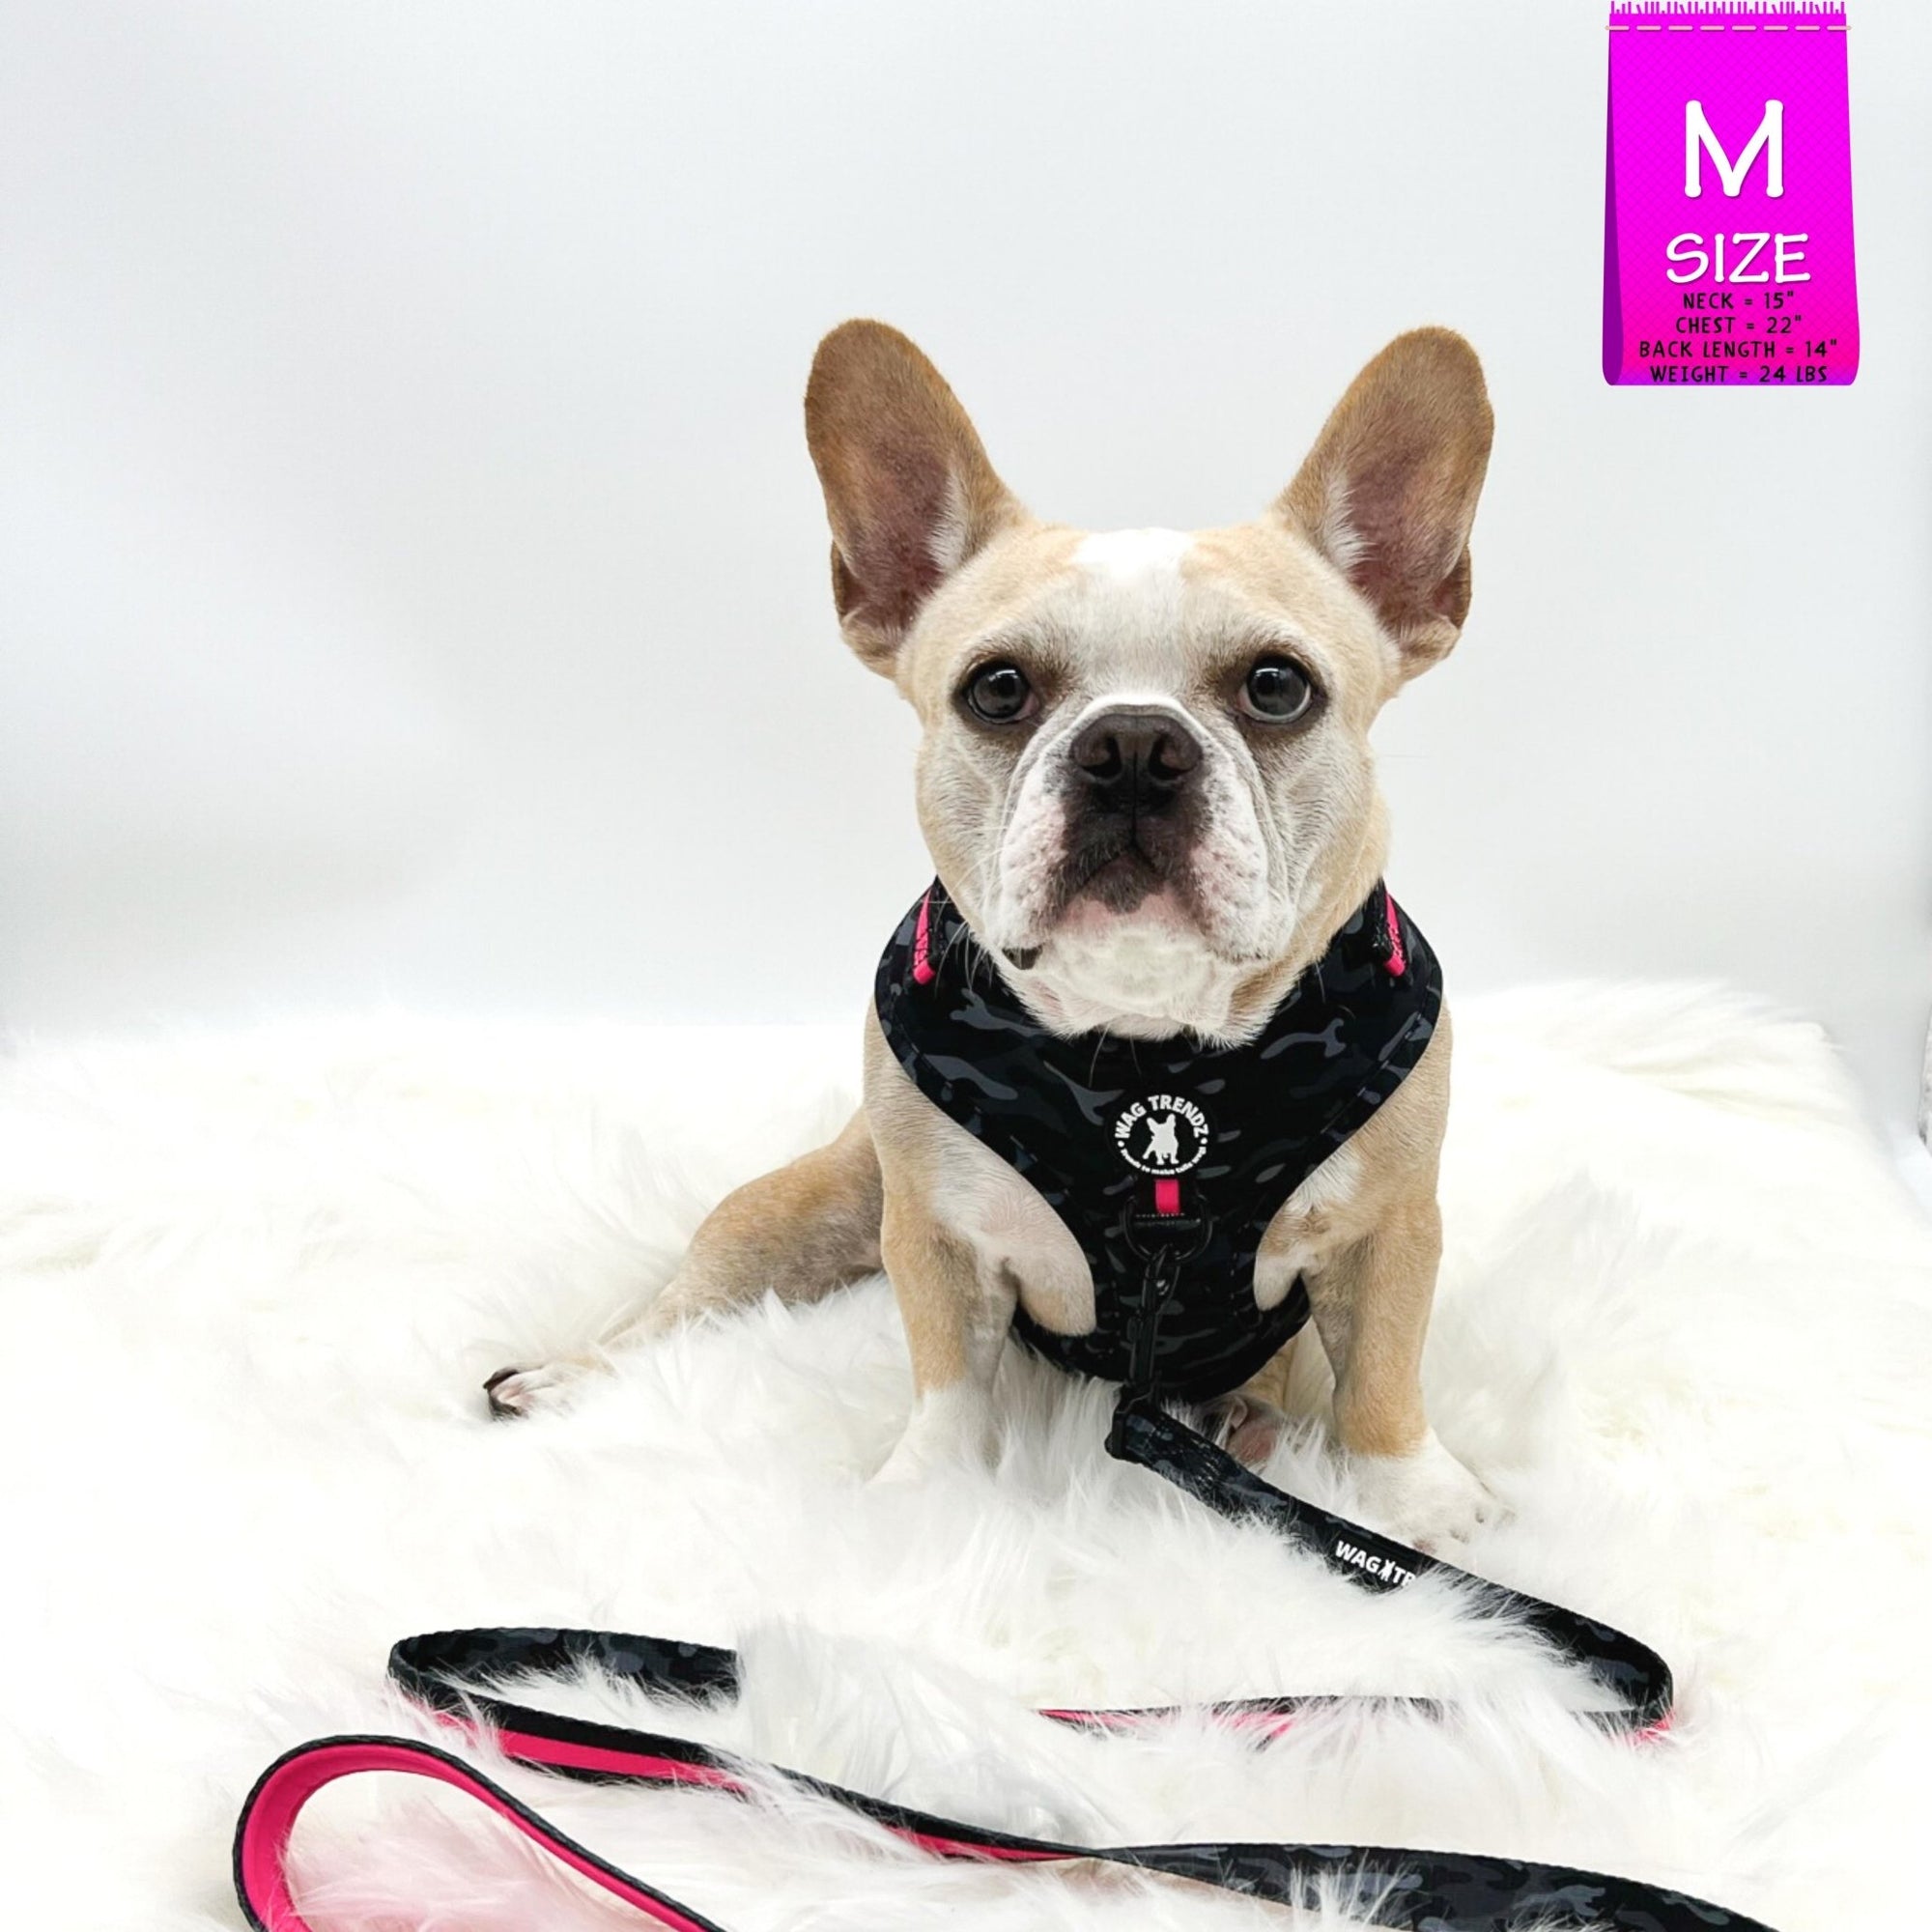 No Pull Dog Harness - Frenchie Bulldog wearing black and gray camo adjustable harness with hot pink accents with matching leash attached and a front clip for pull training - against a solid white background - Wag Trendz